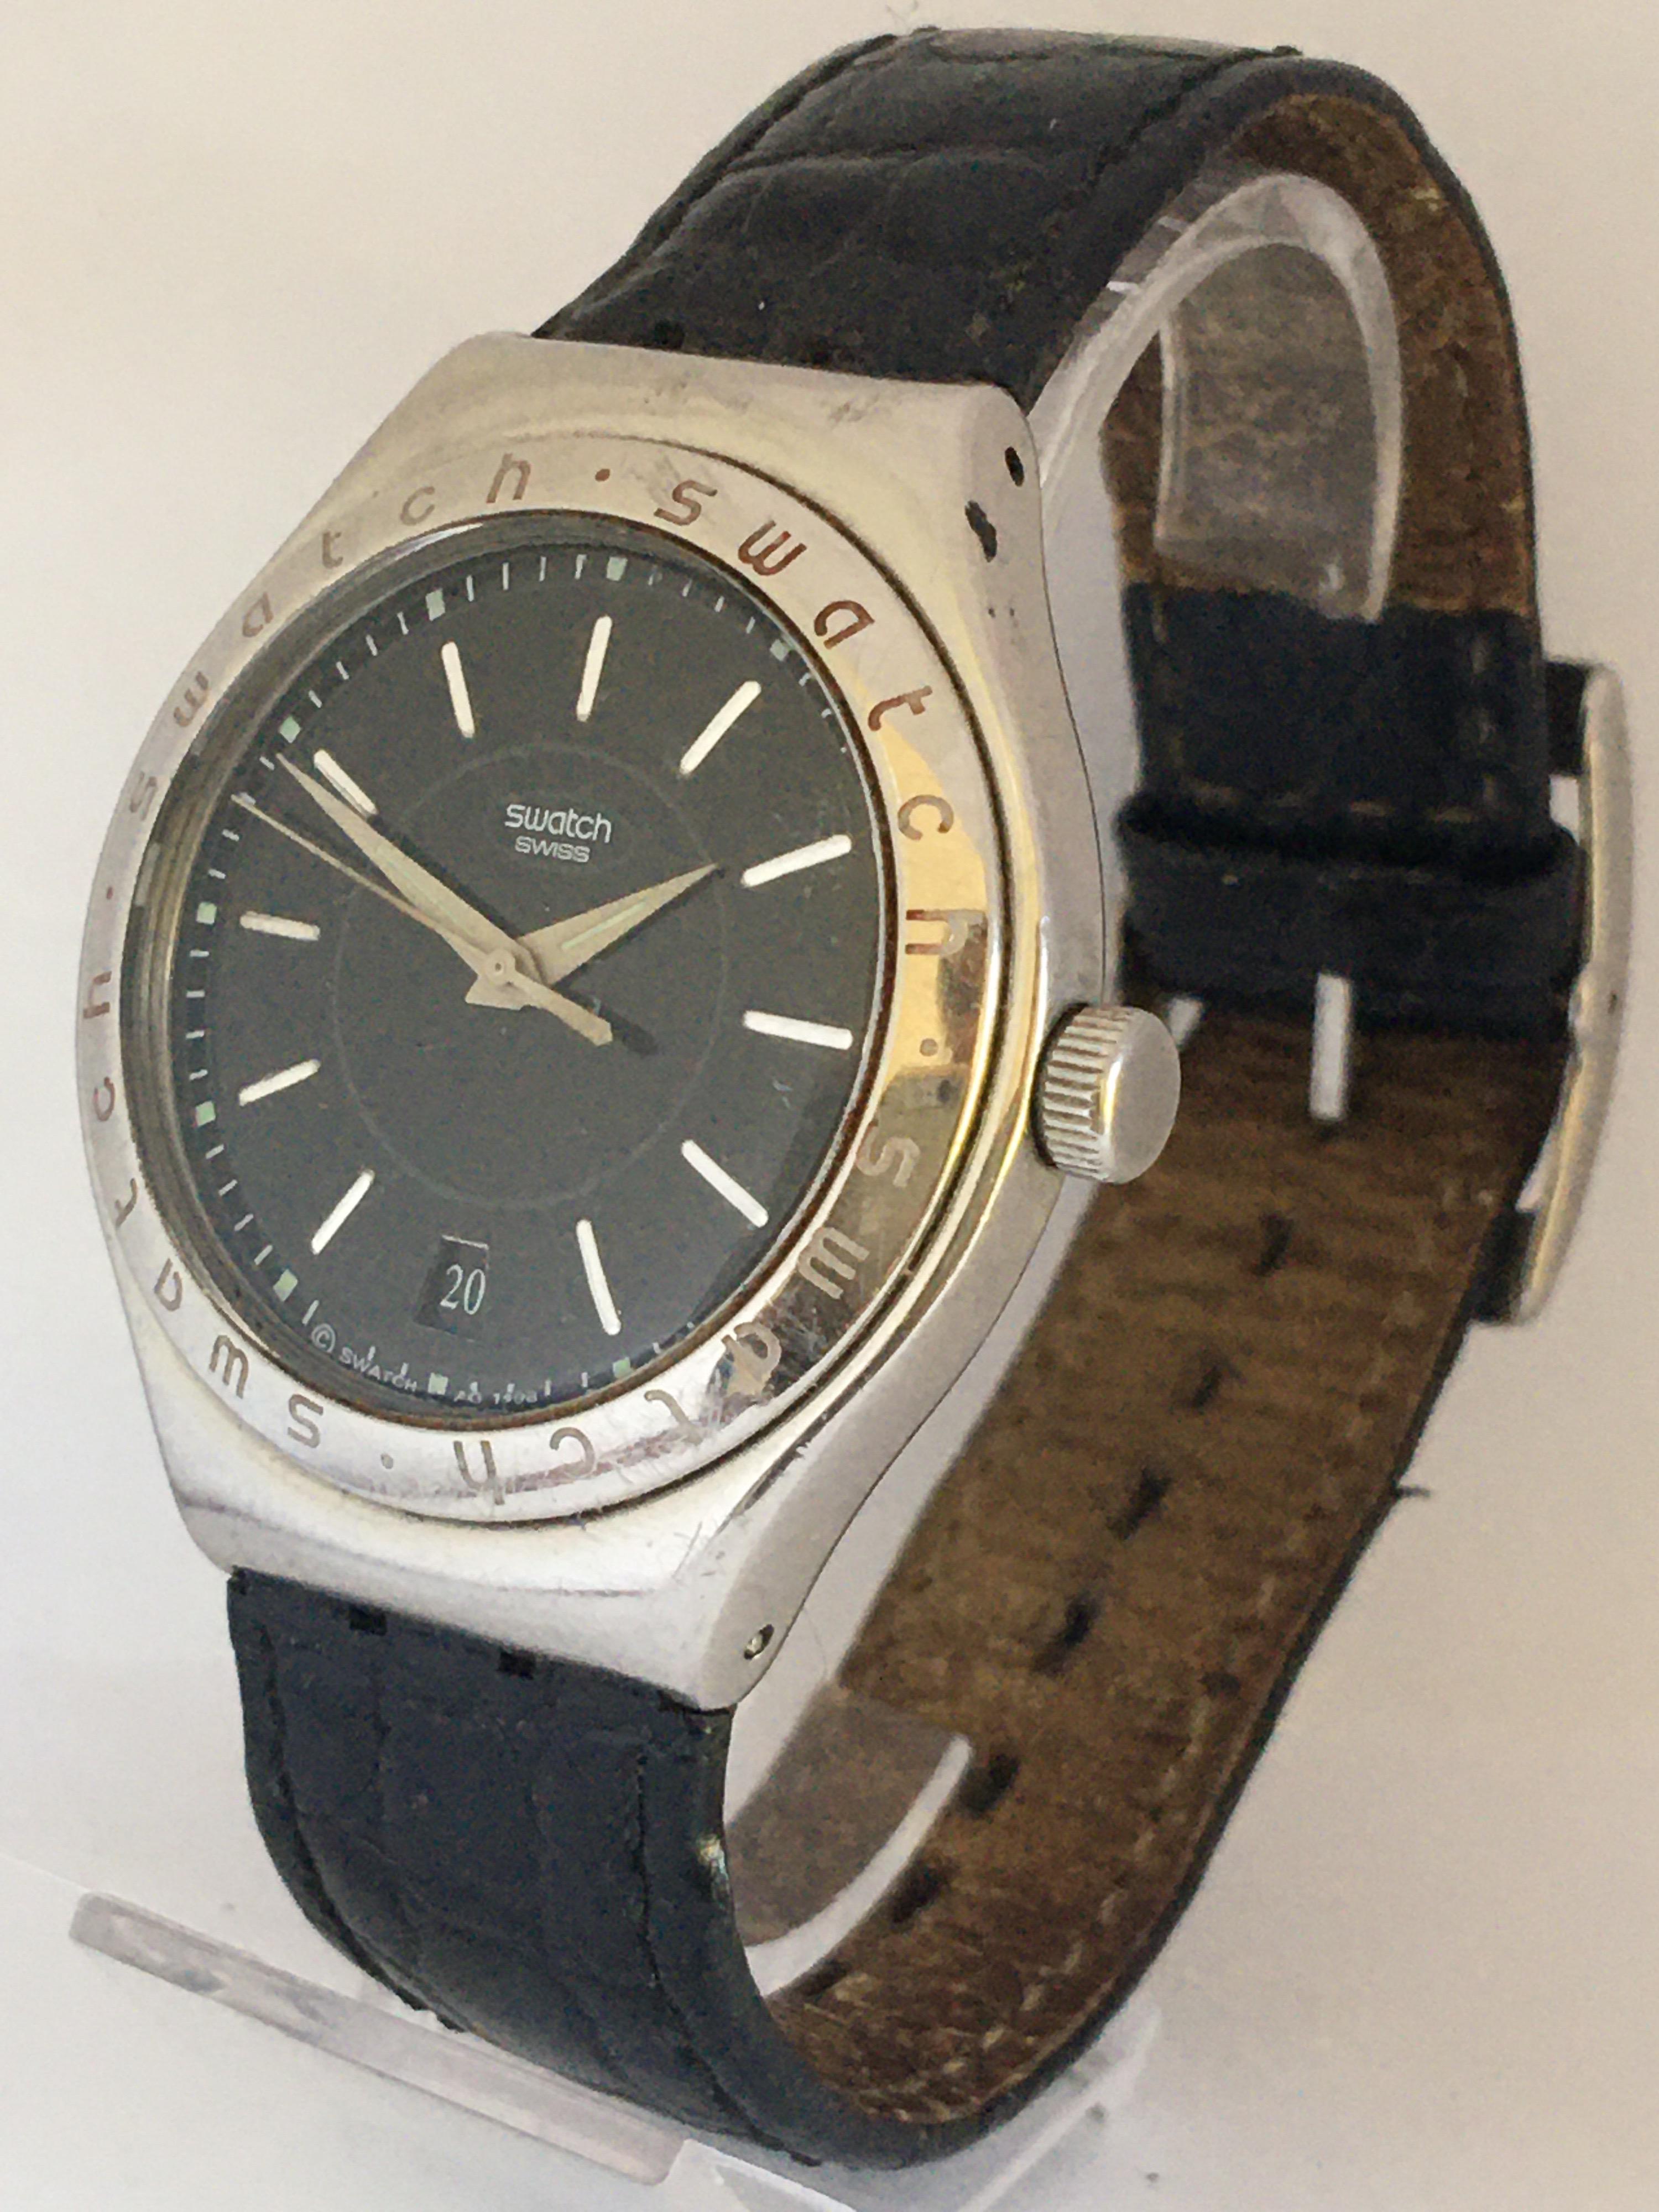 This charming pre-owned vintage automatic watch is working and it is running well. Visible signs of gentle used and ageing with scratches on the stainless steel watch case. 

Please study the images carefully as form part of the description.